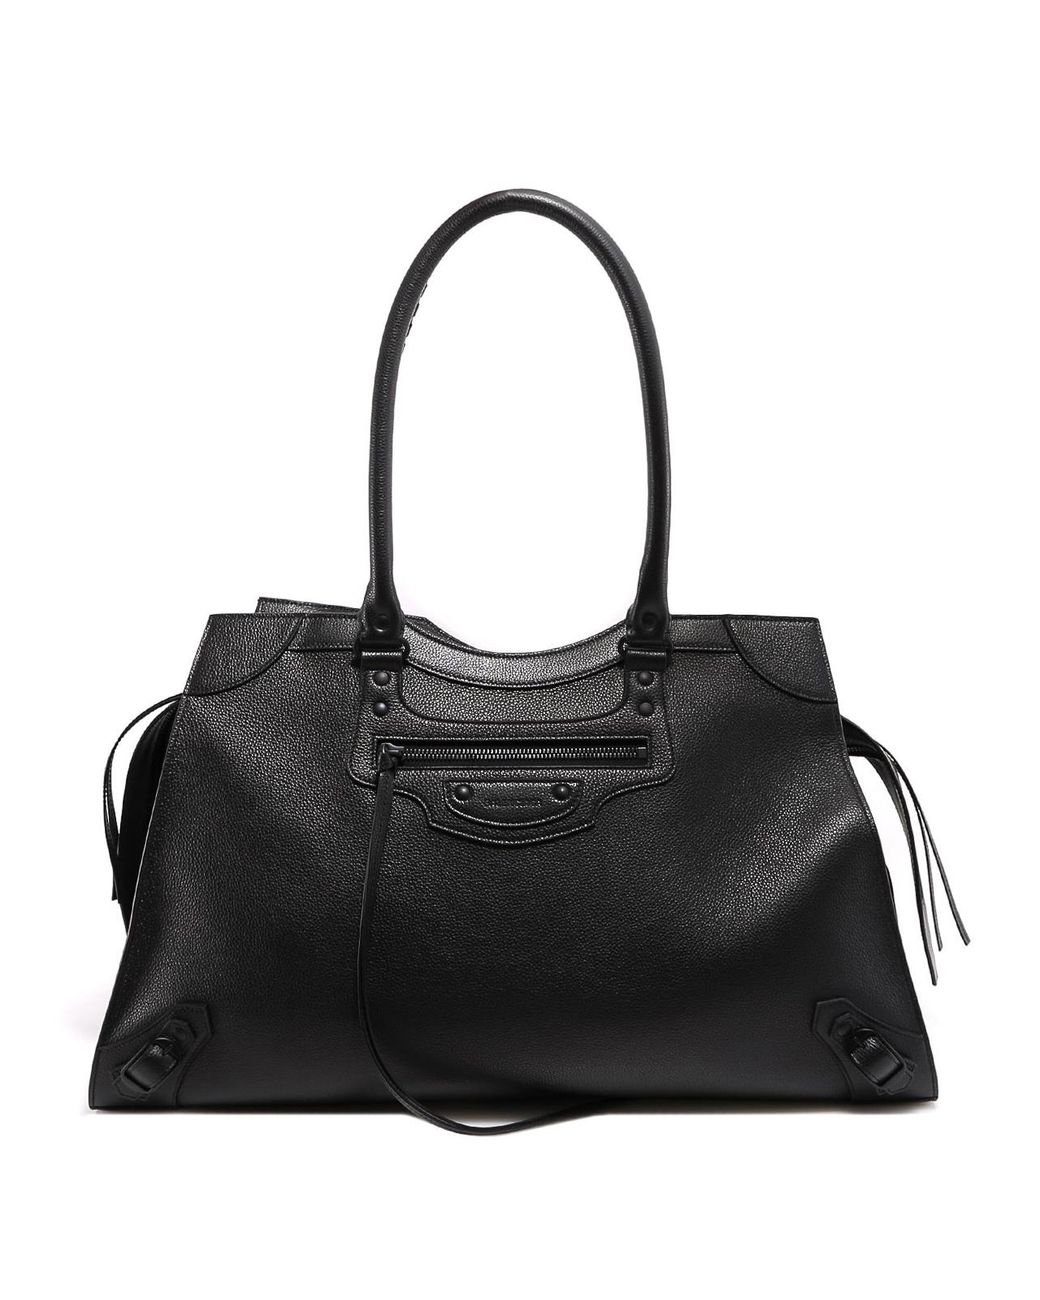 Balenciaga Neo Classic Leather Tote Bag in Black for Men - Lyst